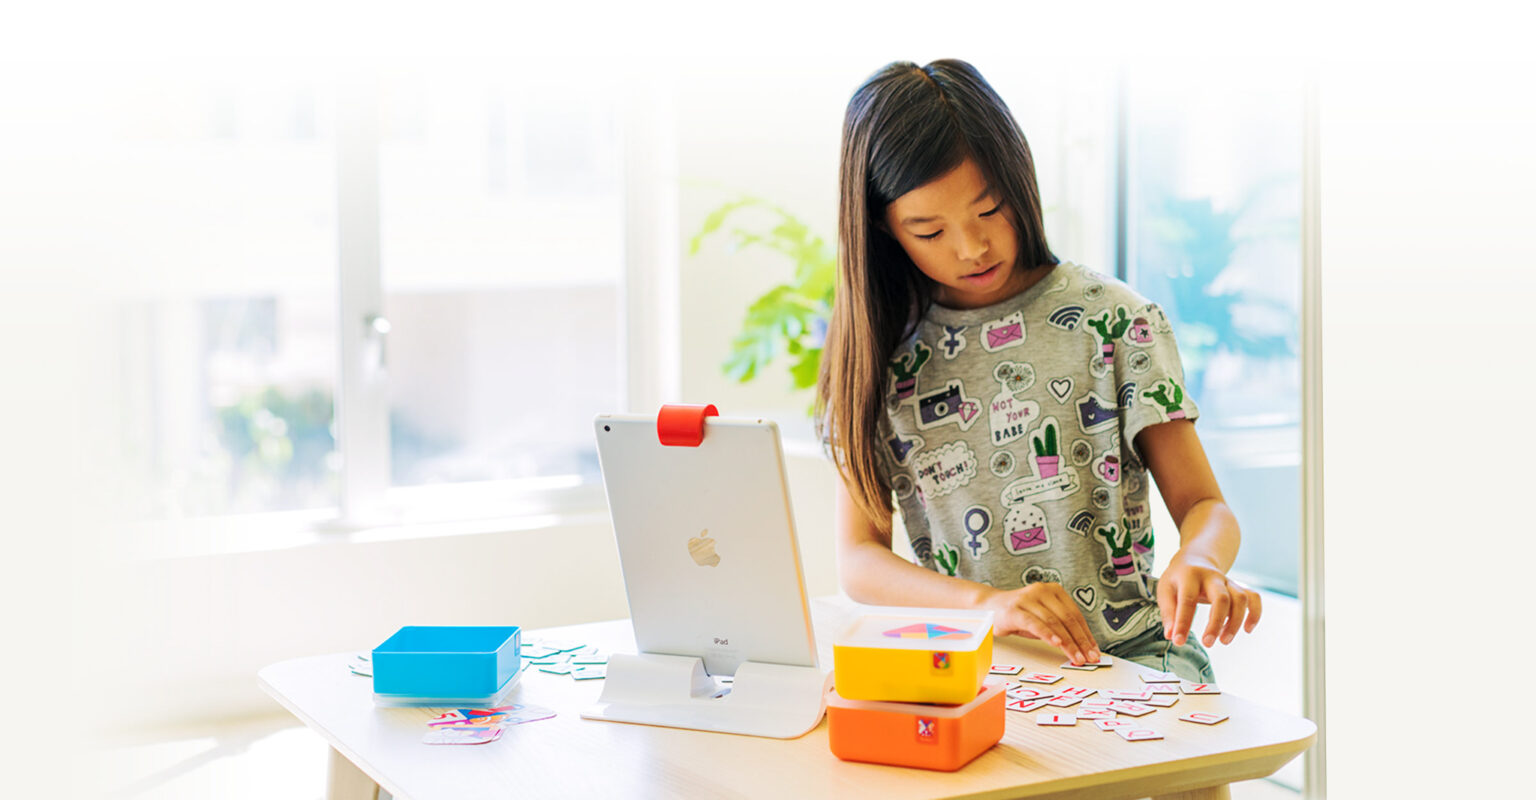 Day 7 of 12 Smart Gifts: Osmo Genius Kit. Image: Osmo.